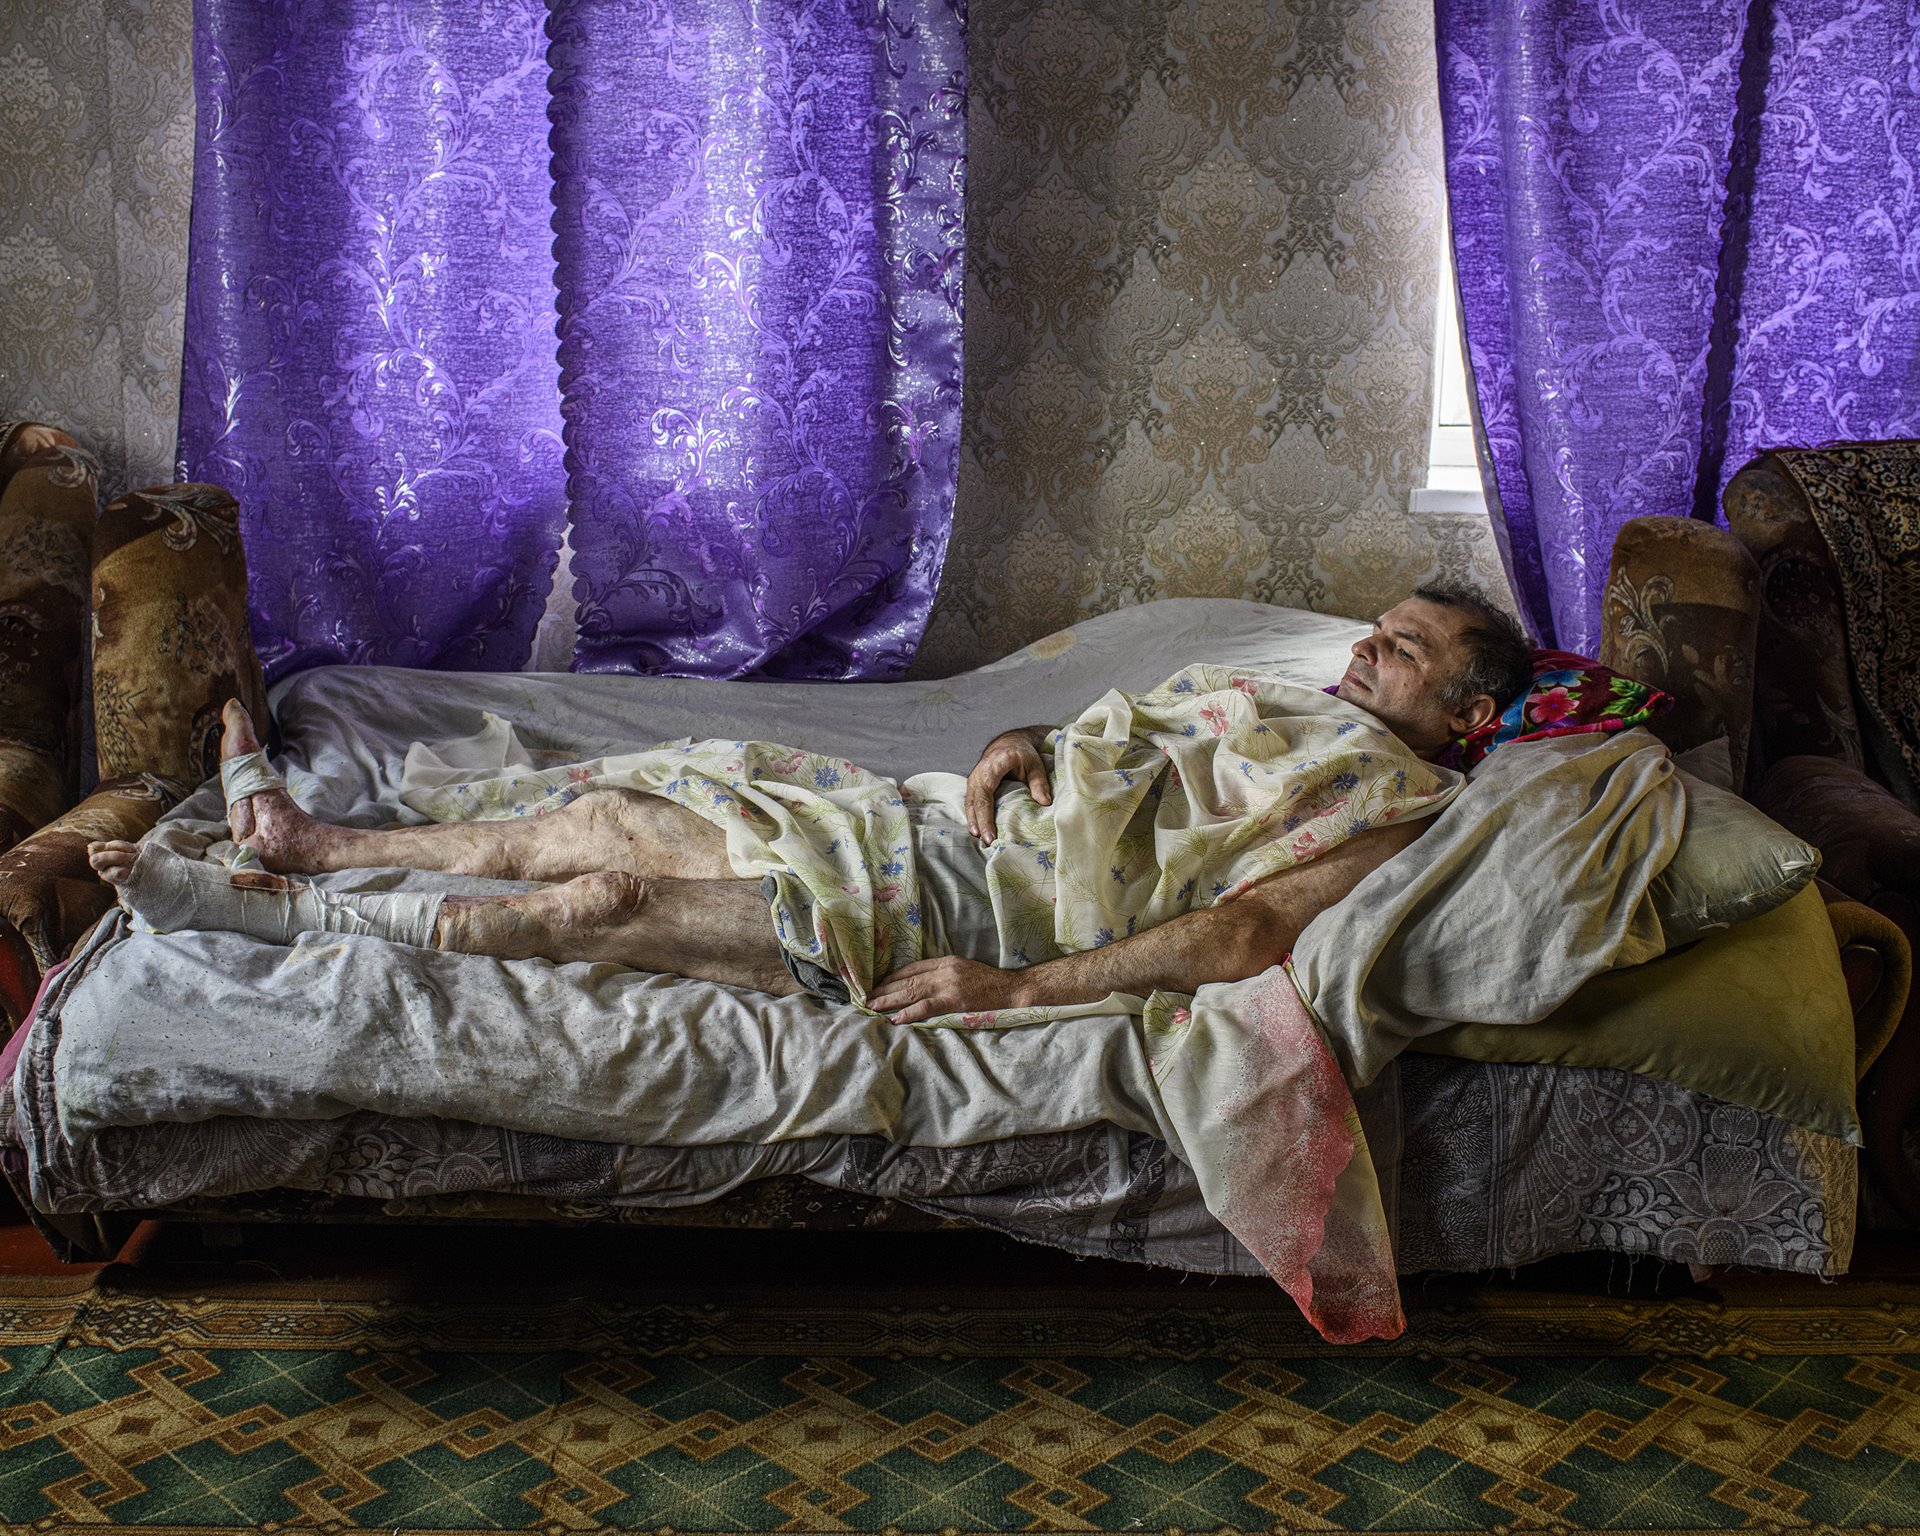 Vassili Kissilov lies in bed in Kodema, Donetsk, Ukraine. Kissilov was driving his tractor in a field near his village on 24 April 2015, when he hit a landmine. His legs were badly burned and he lost two fingers and two toes. Some of his wounds do not heal. Unexploded ordnance and mines pose a threat to people living in the Donbass region, with Reliefweb reporting more than 1,600 deaths from such explosions up to 2018.